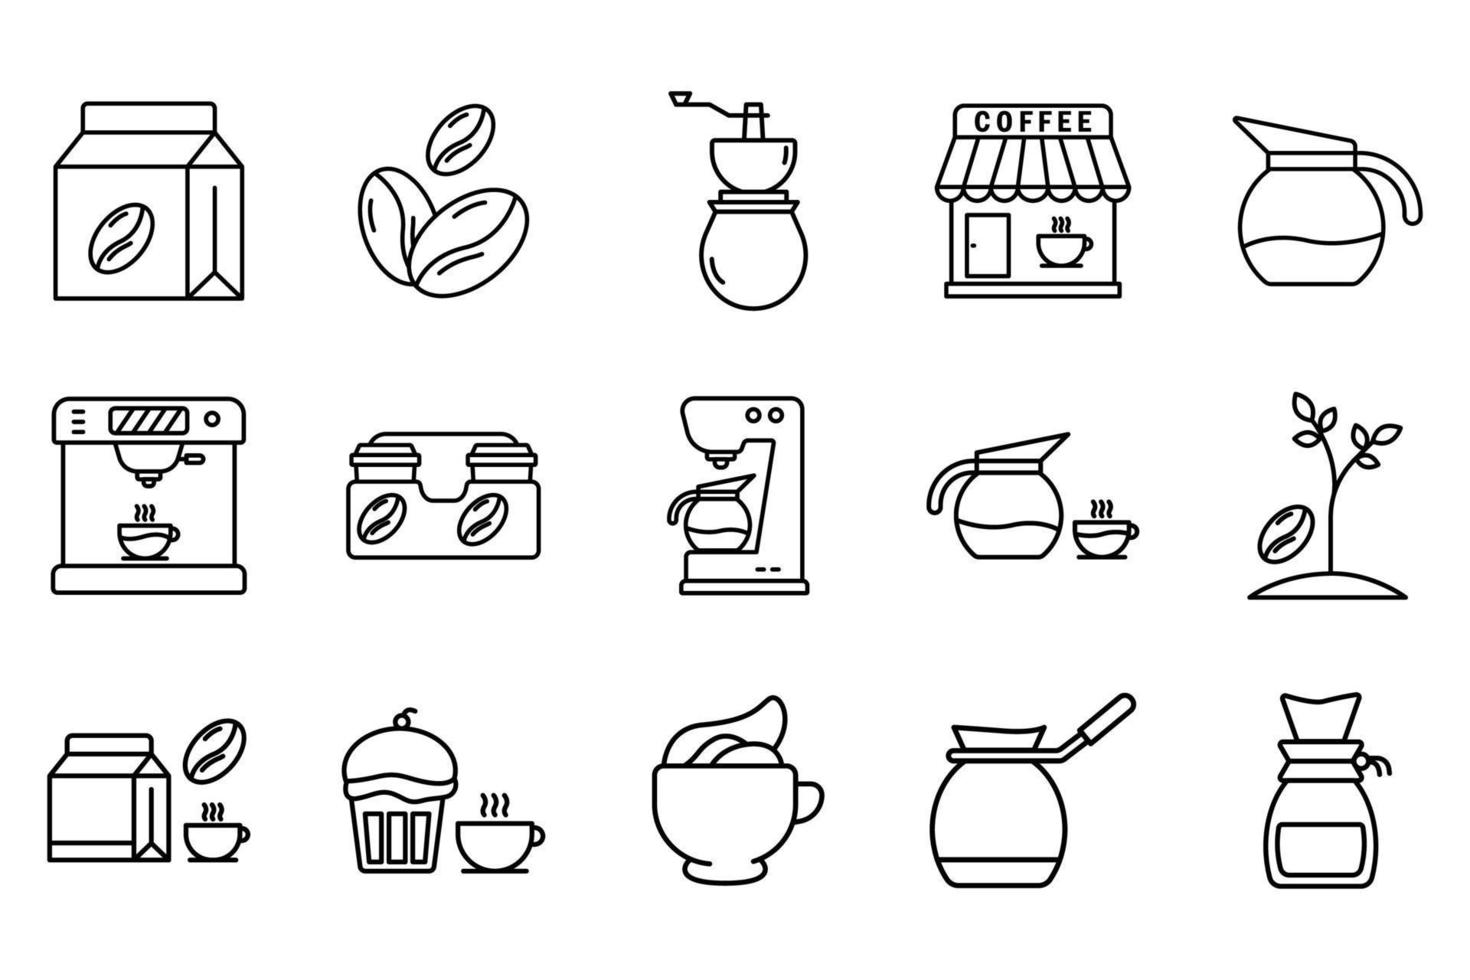 Coffee element set icon illustration. Line icon style. Coffee machine, Coffee shop, Coffee pot, grinder, coffee beans, espresso, cream and others. Simple vector design editable